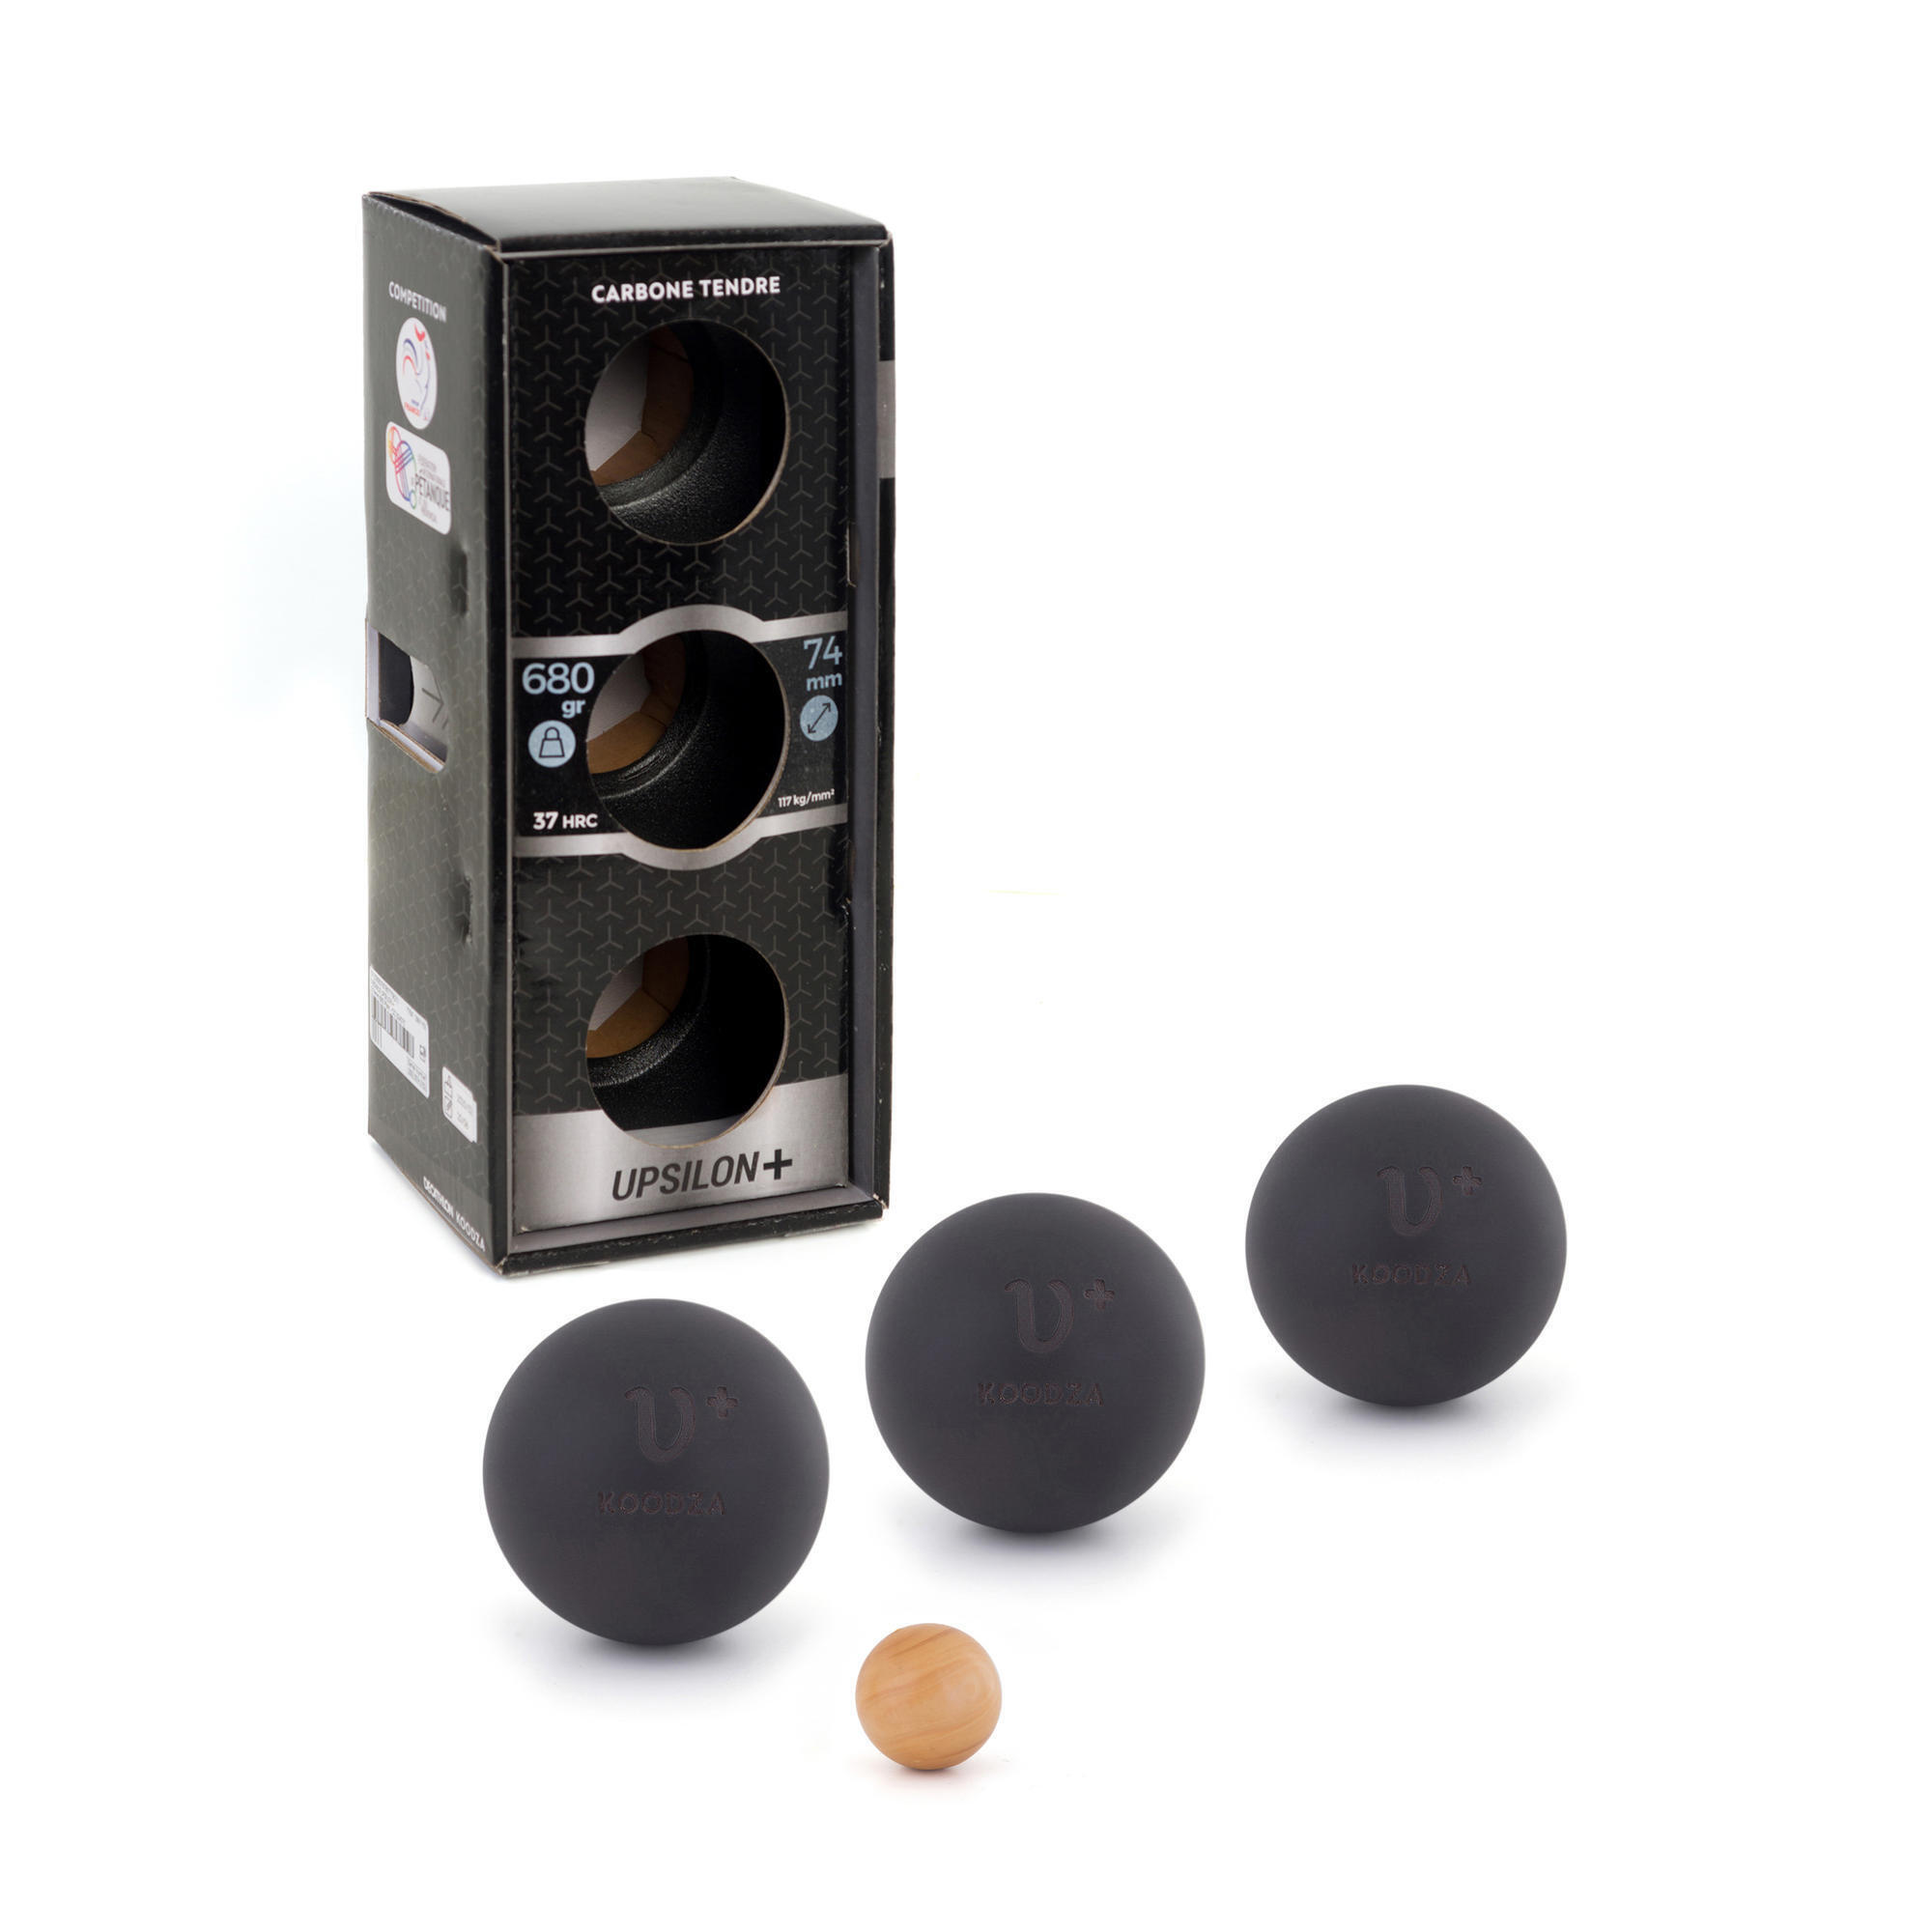 Refurbished 3 Soft Competition Petanque Boules - B Grade 1/7